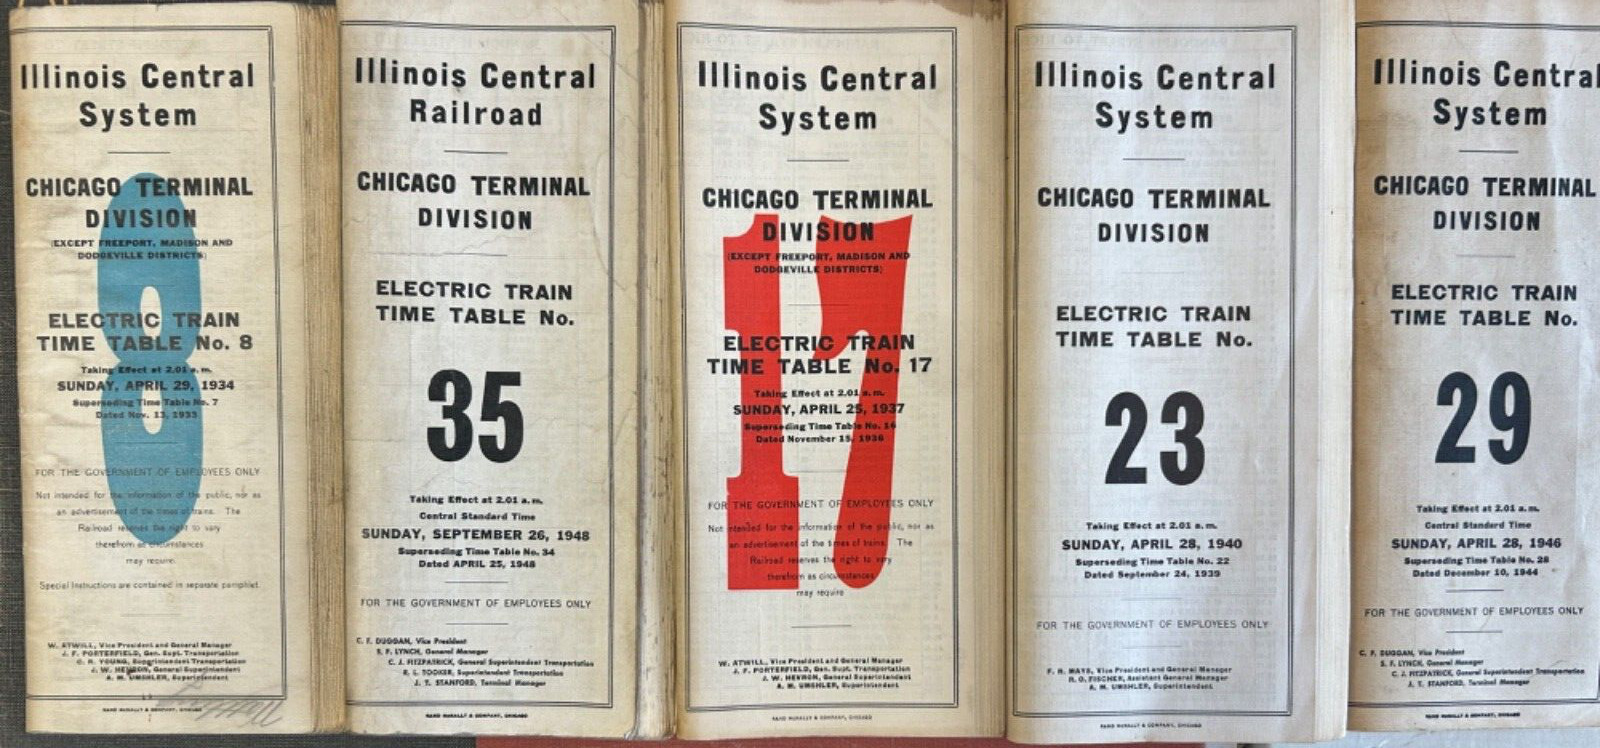 Lot of 5 Illinois Central Railroad Chicago Division Employee Timetable No. 29...